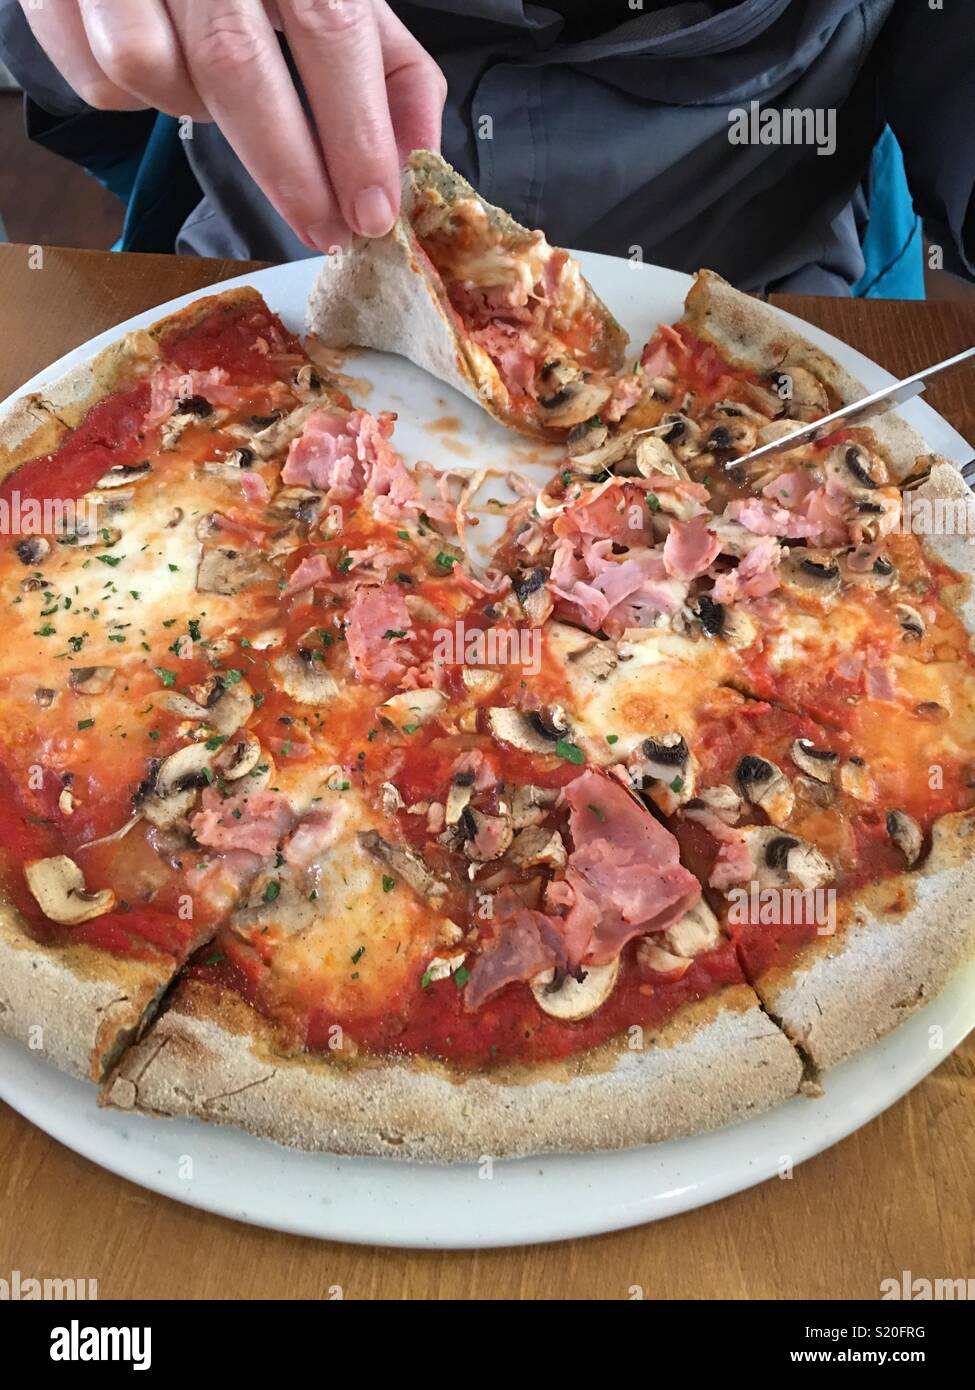 Man eating a ham and mushroom non gluten pizza made with a hemp based crust Stock Photo